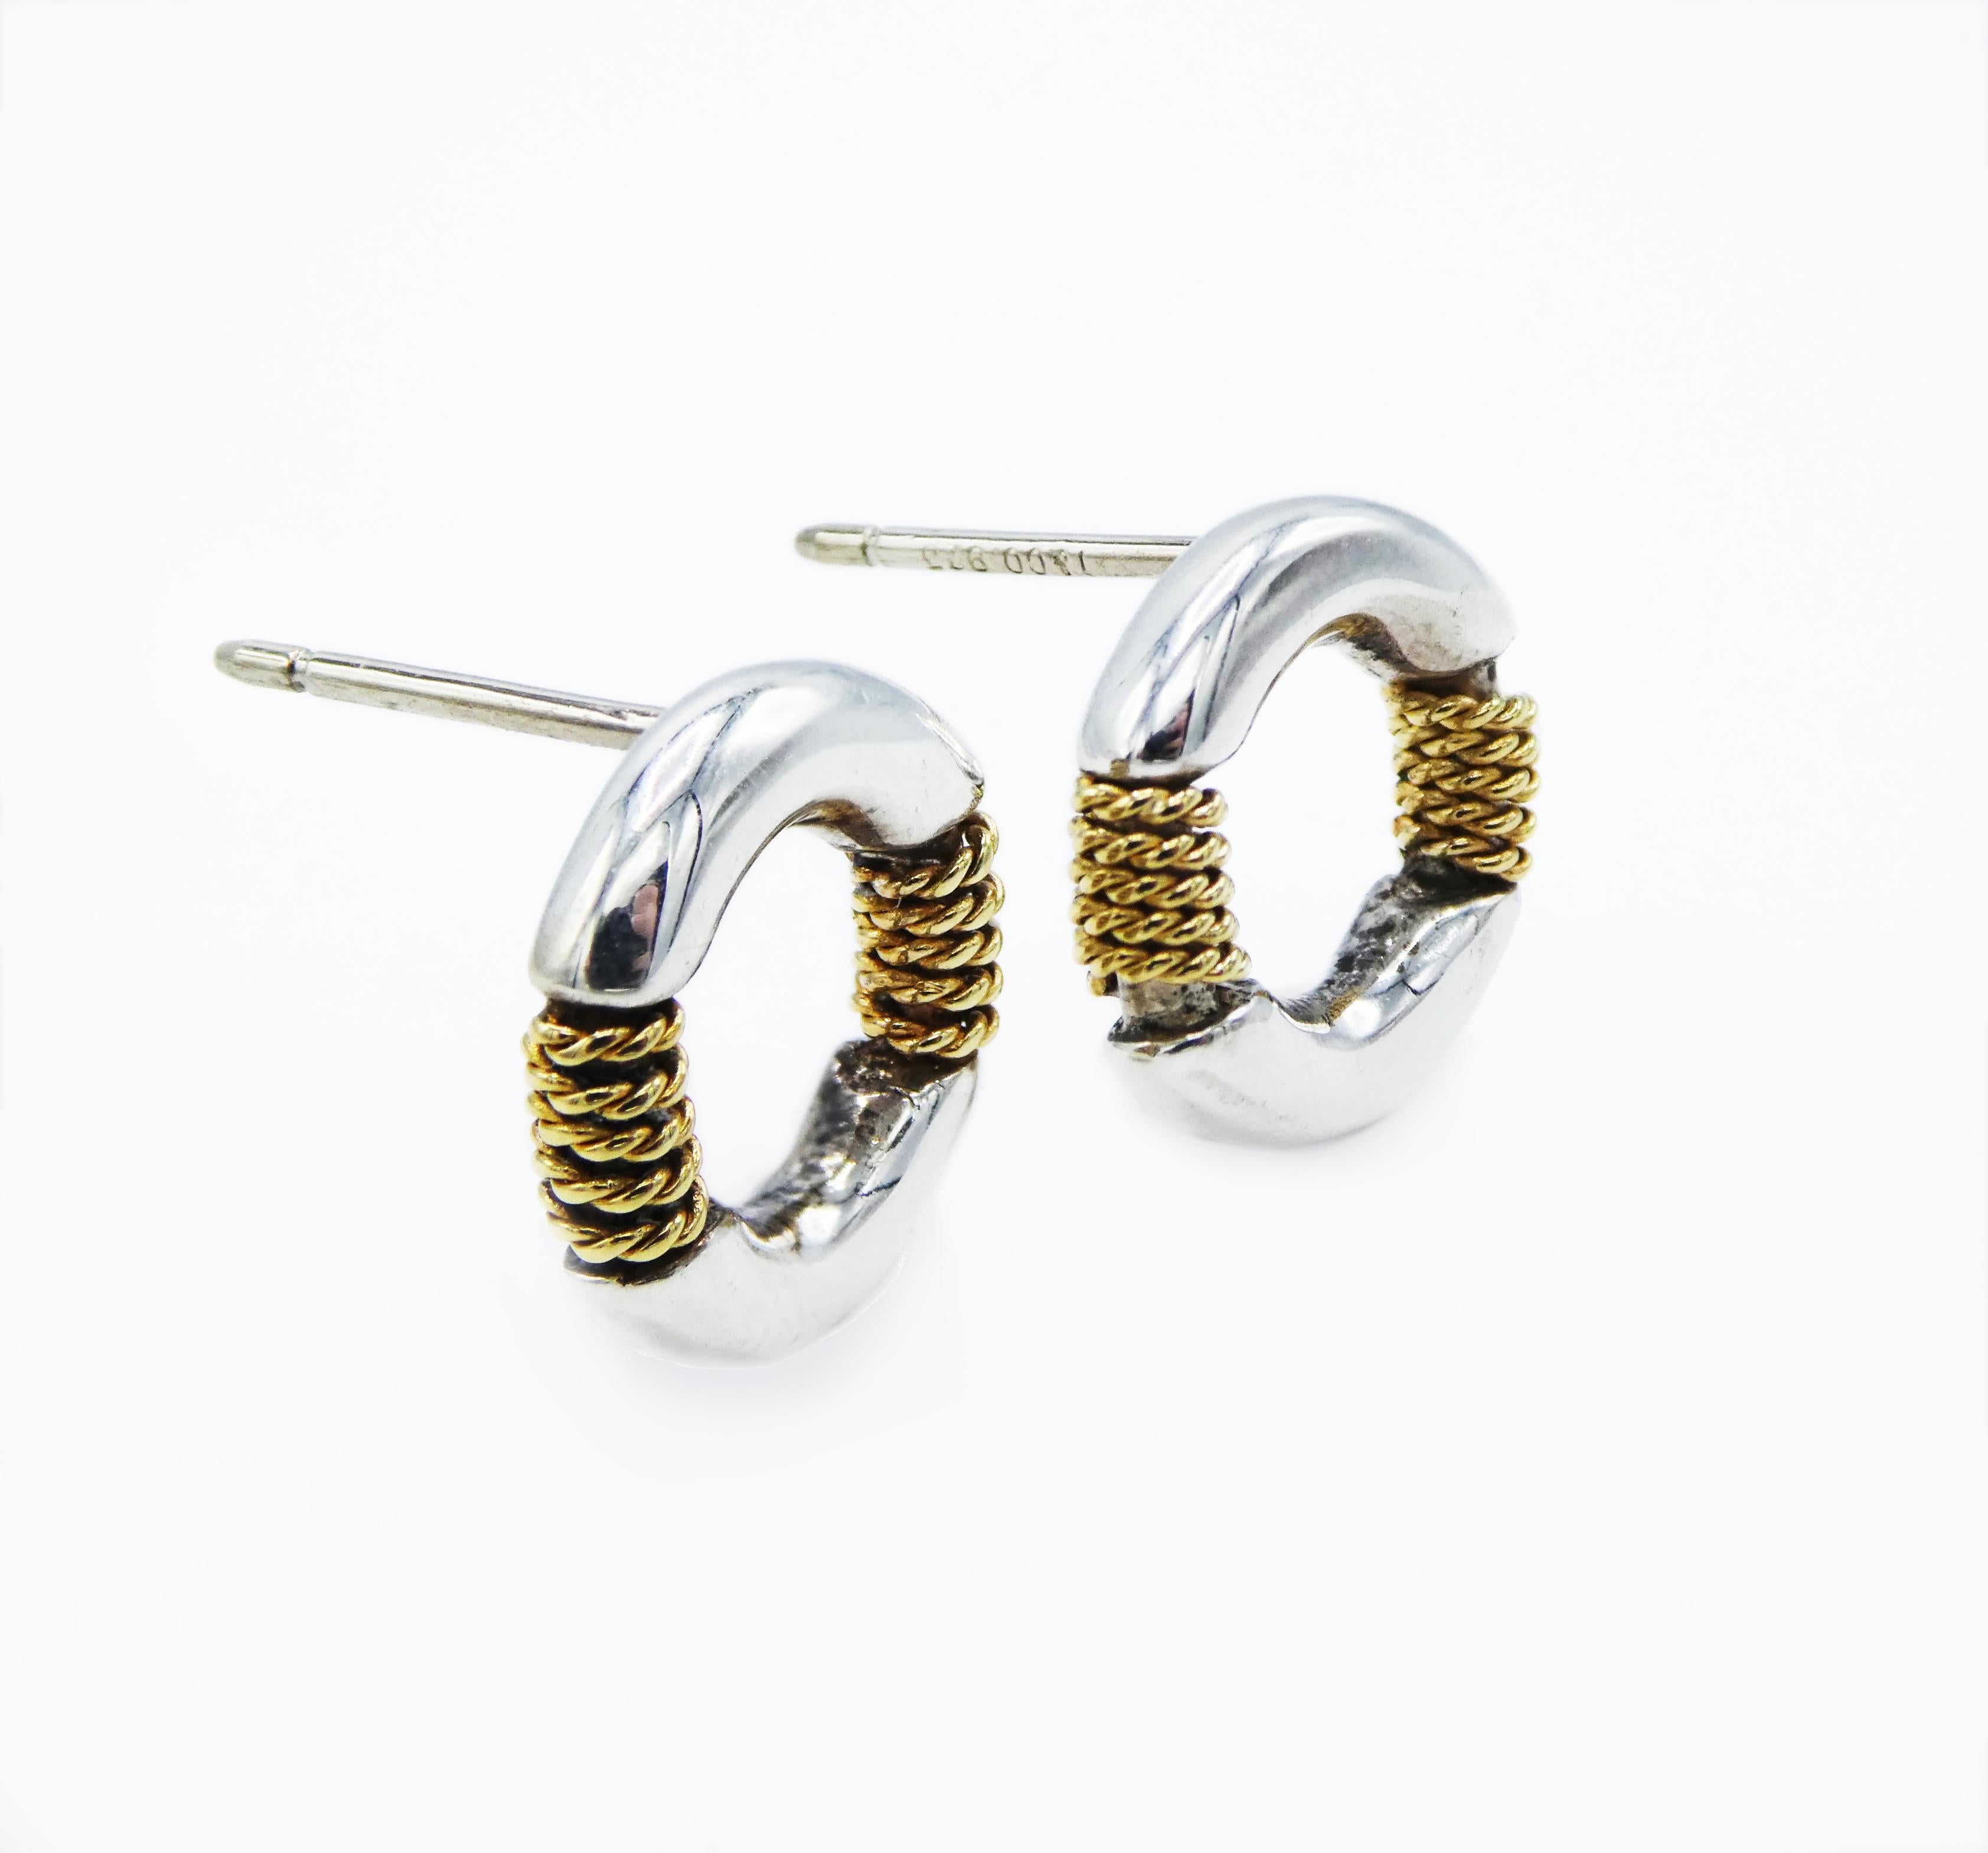 Tiffany & Co. Vintage Twisted Rope Round Circle Studs 18k Yellow Gold Sterling Silver Earrings

Metal: 18k Yellow Gold & Sterling Silver
Weight:  8.55 grams
Stamped: 